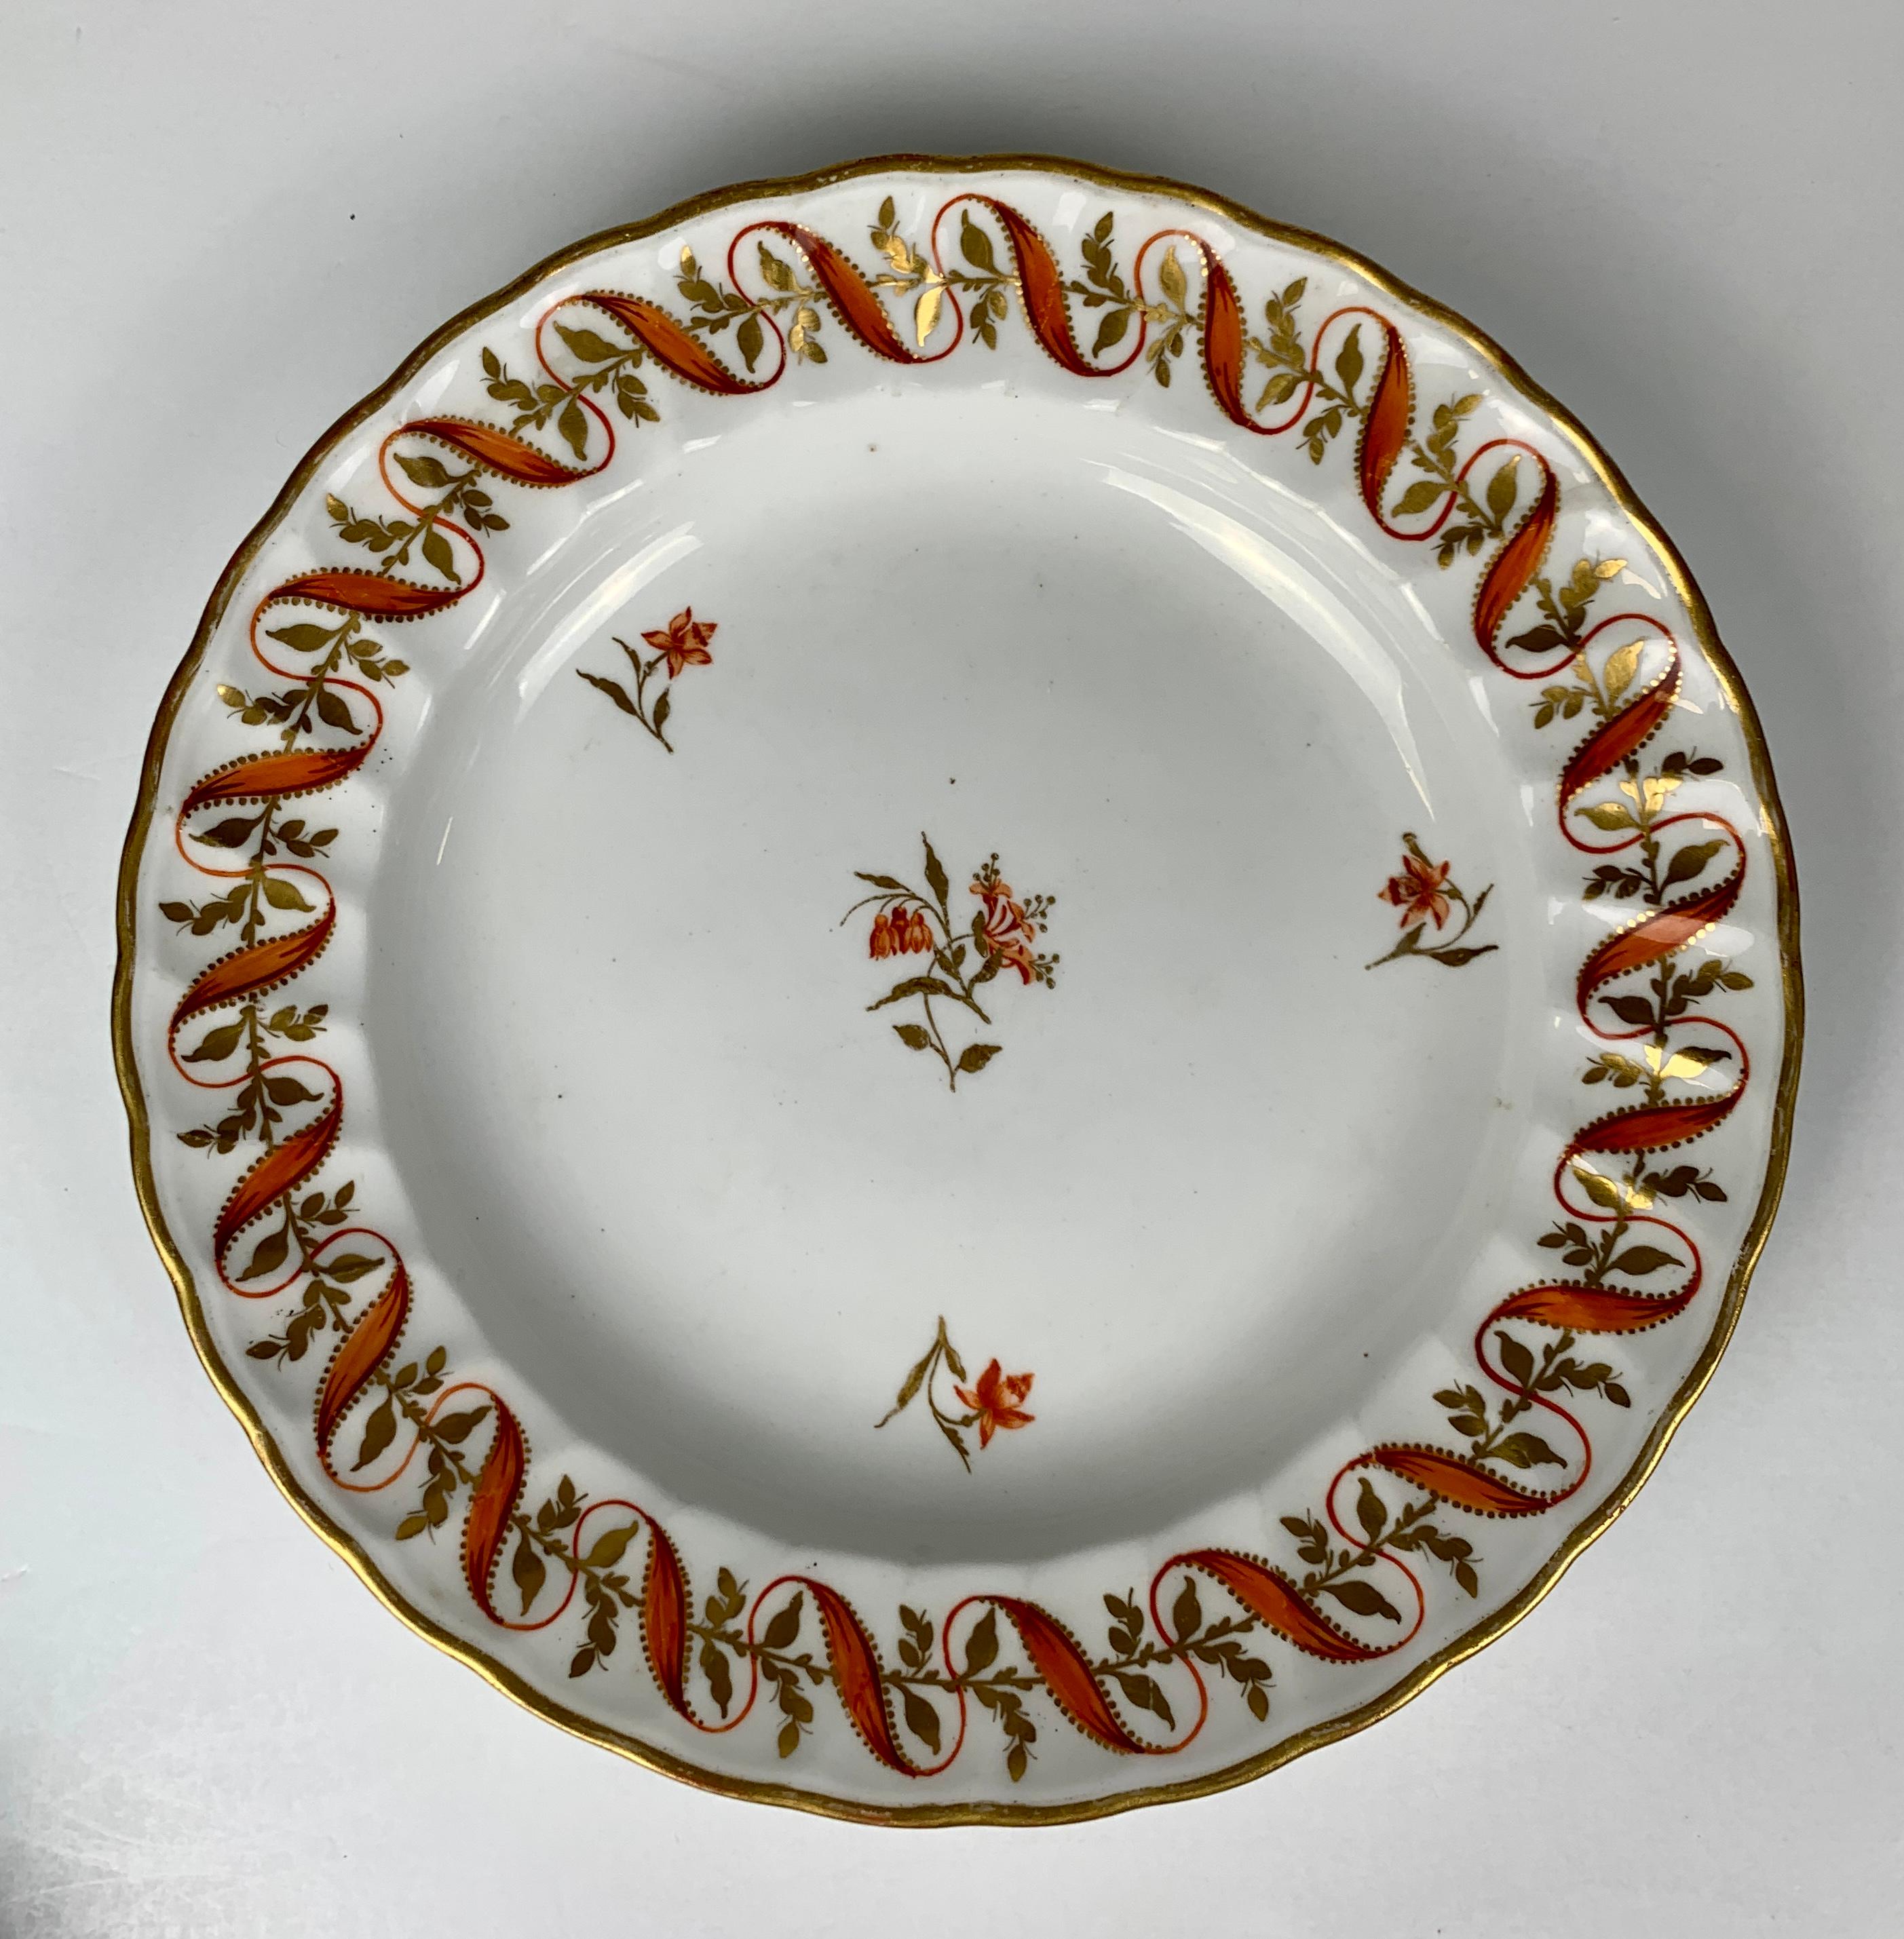 This set of four hand-painted dishes were made by Derby in England late in the 18th century, circa 1790.
The border shows an exquisite wavy orange ribbon that opens and closes while it weaves in and out of a line of golden flowers. 
The center of